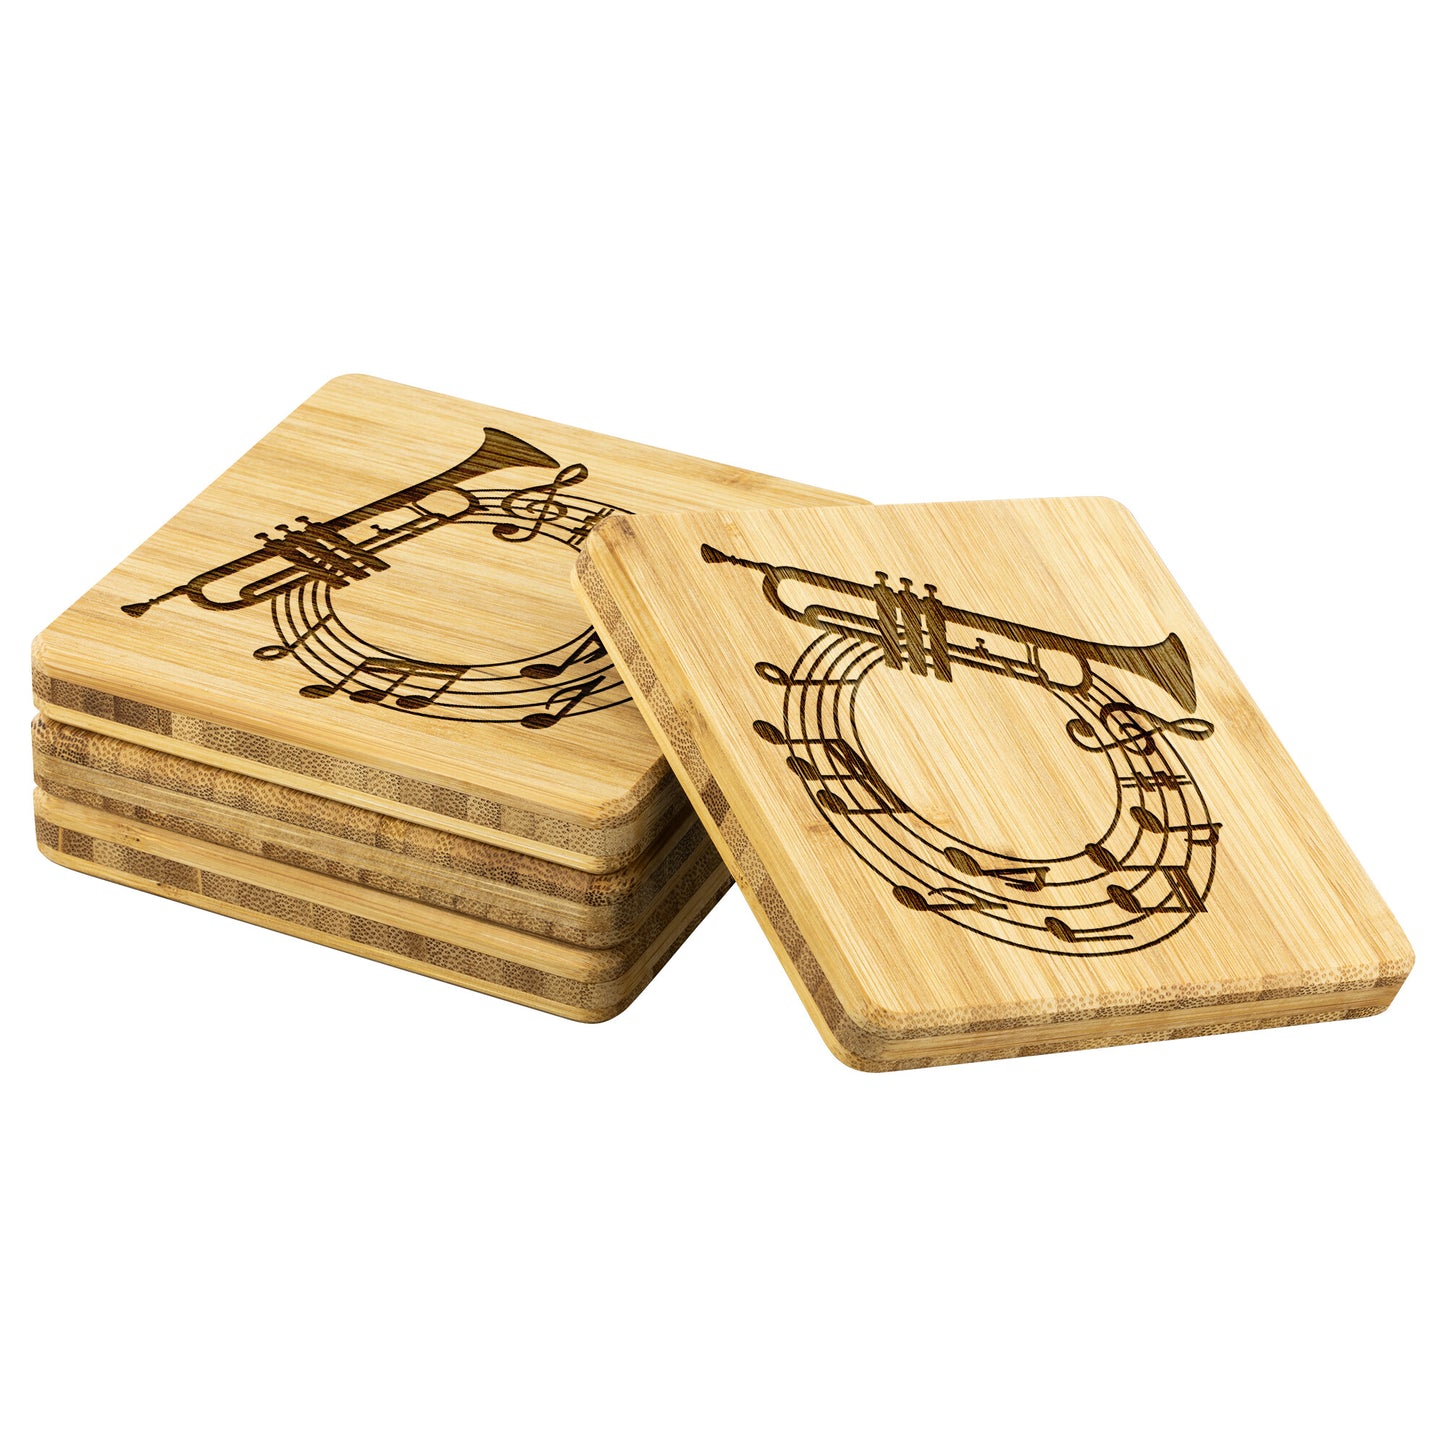 Trumpet Music Bamboo Coasters - Set of 4, Gift for Musician, Music Coasters teelaunch